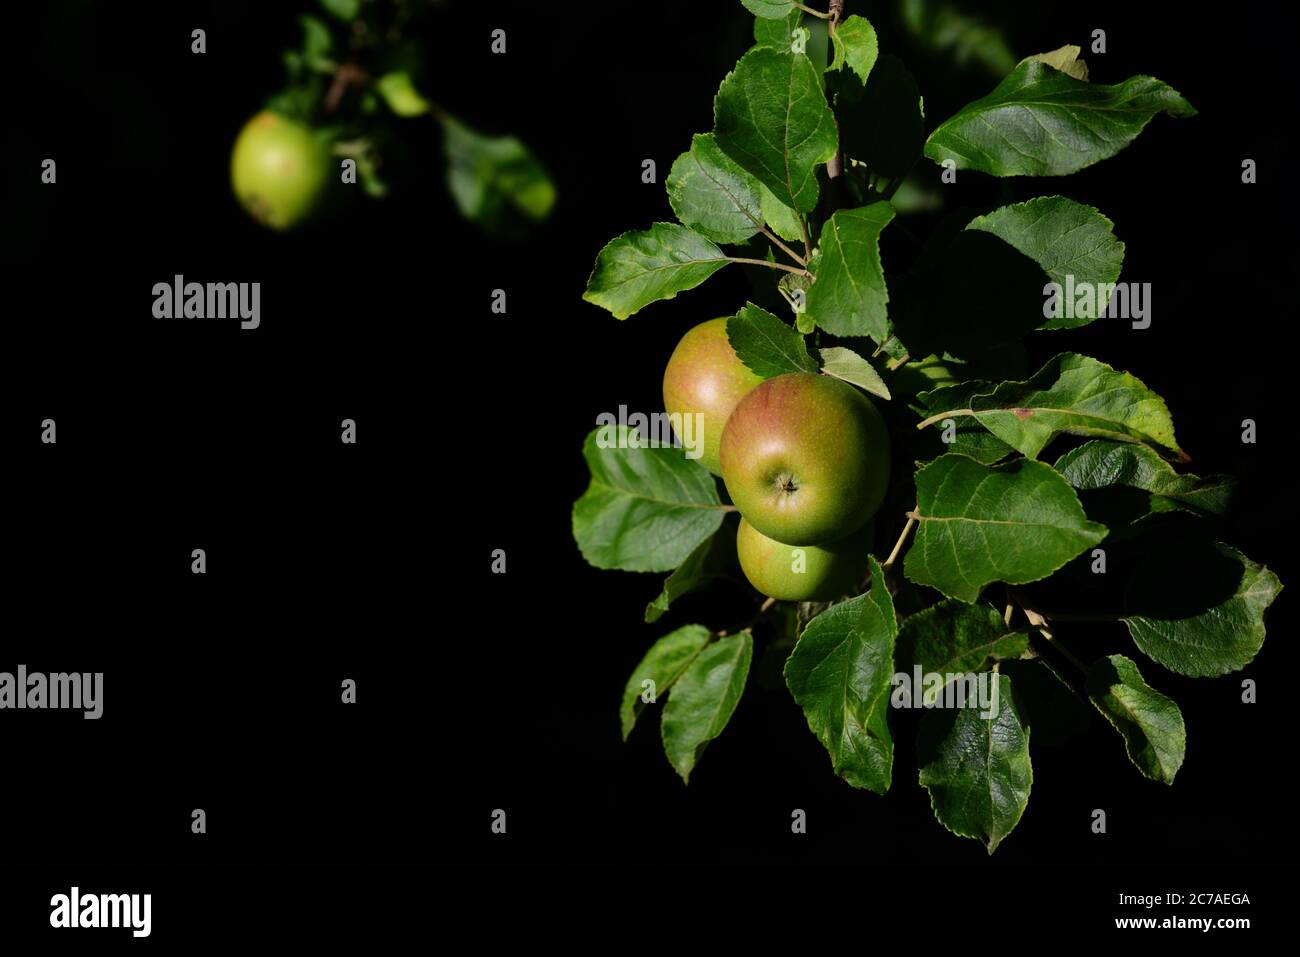 On an apple tree, apples grow on a branch against a black background Stock Photo